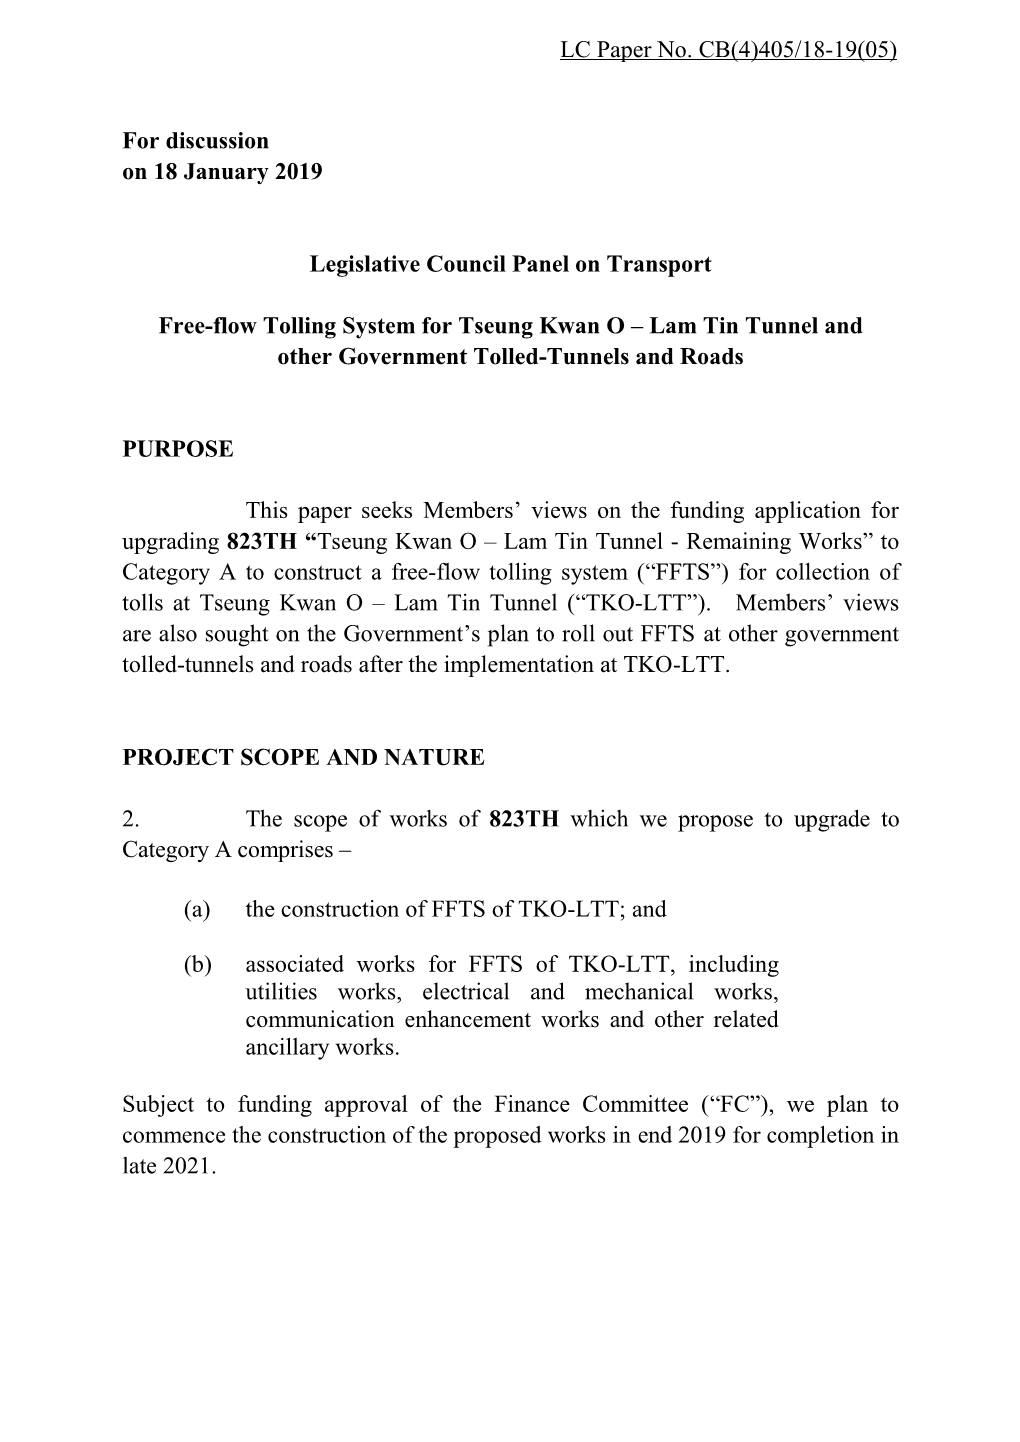 Discussion Paper for Legislative Council Panel on Transport